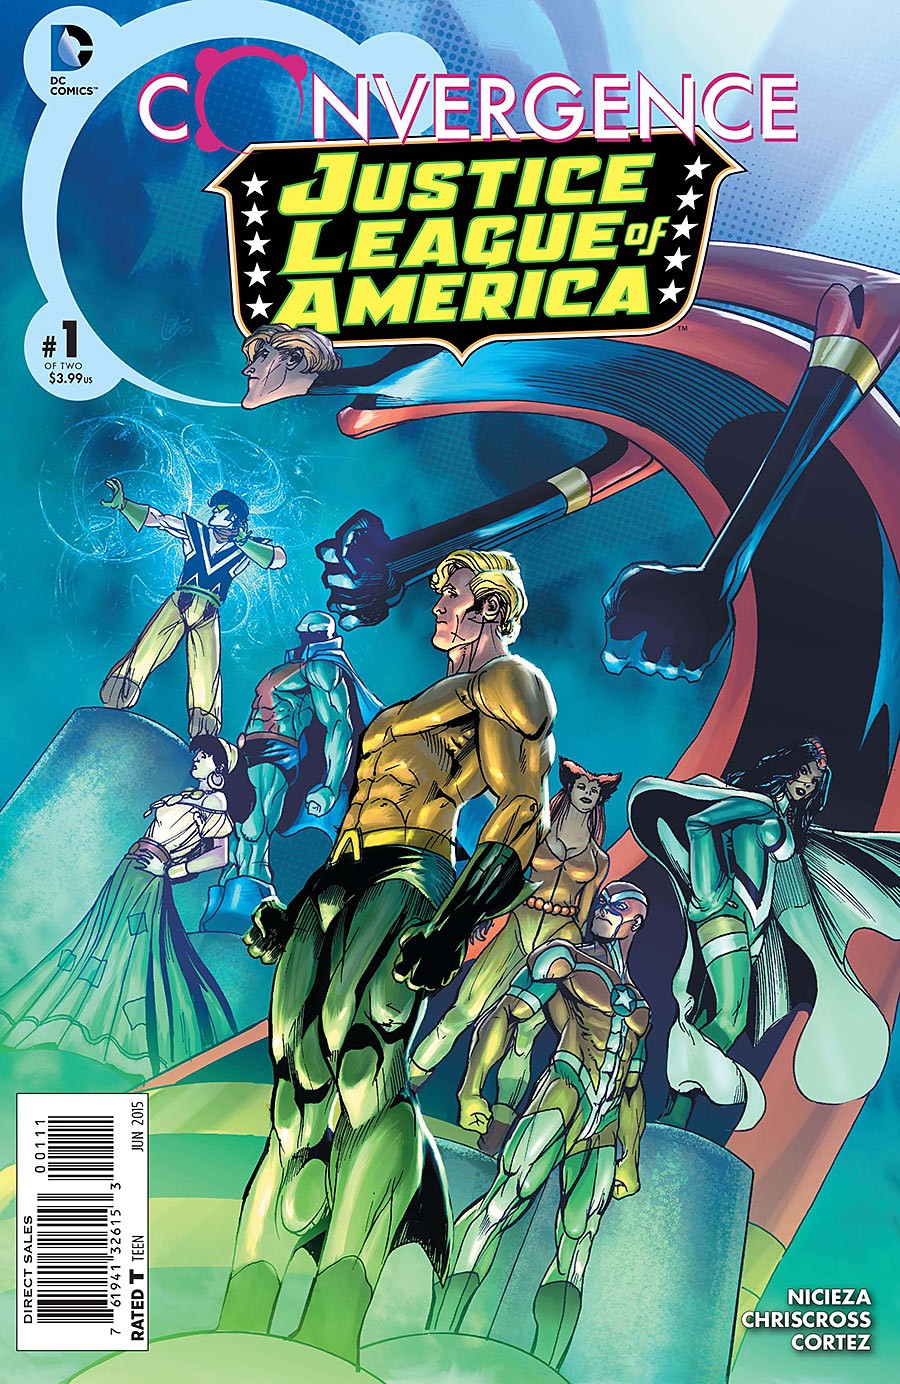 Convergence: Justice League of America Vol. 1 #1